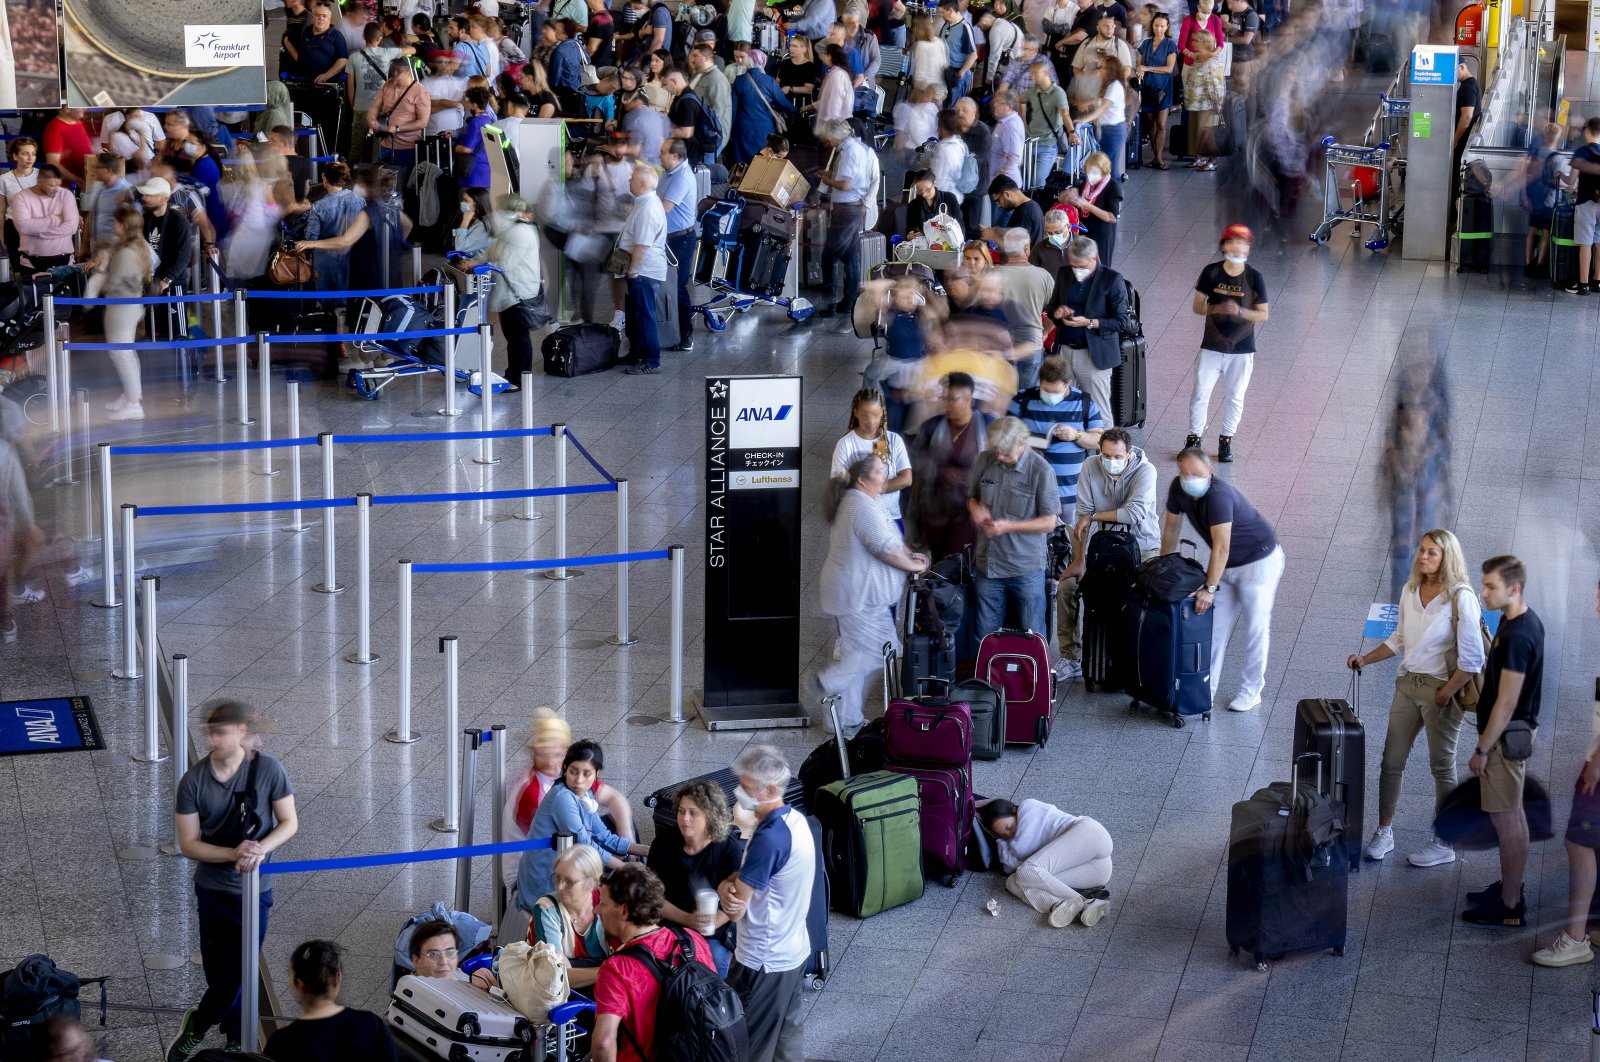 A woman rests in a queue at a check-in terminal at the international airport in Frankfurt, Germany, July 2, 2022. (AP Photo)